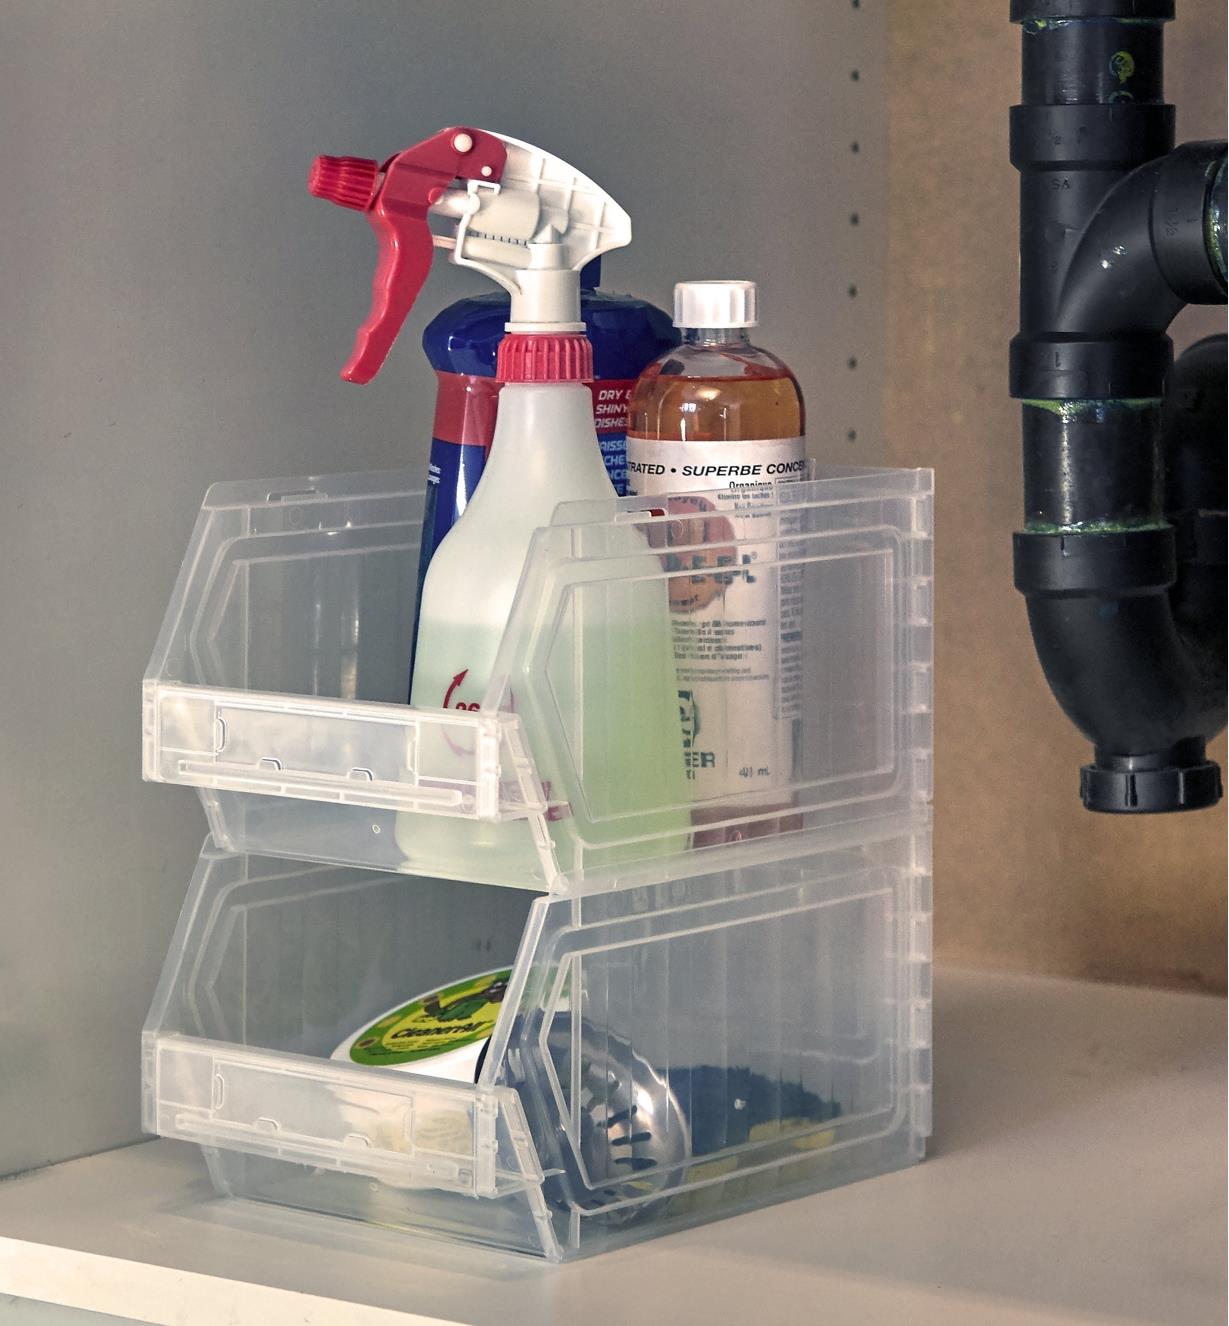 Two stackable light-duty storage bins used under a sink to hold cleaning supplies